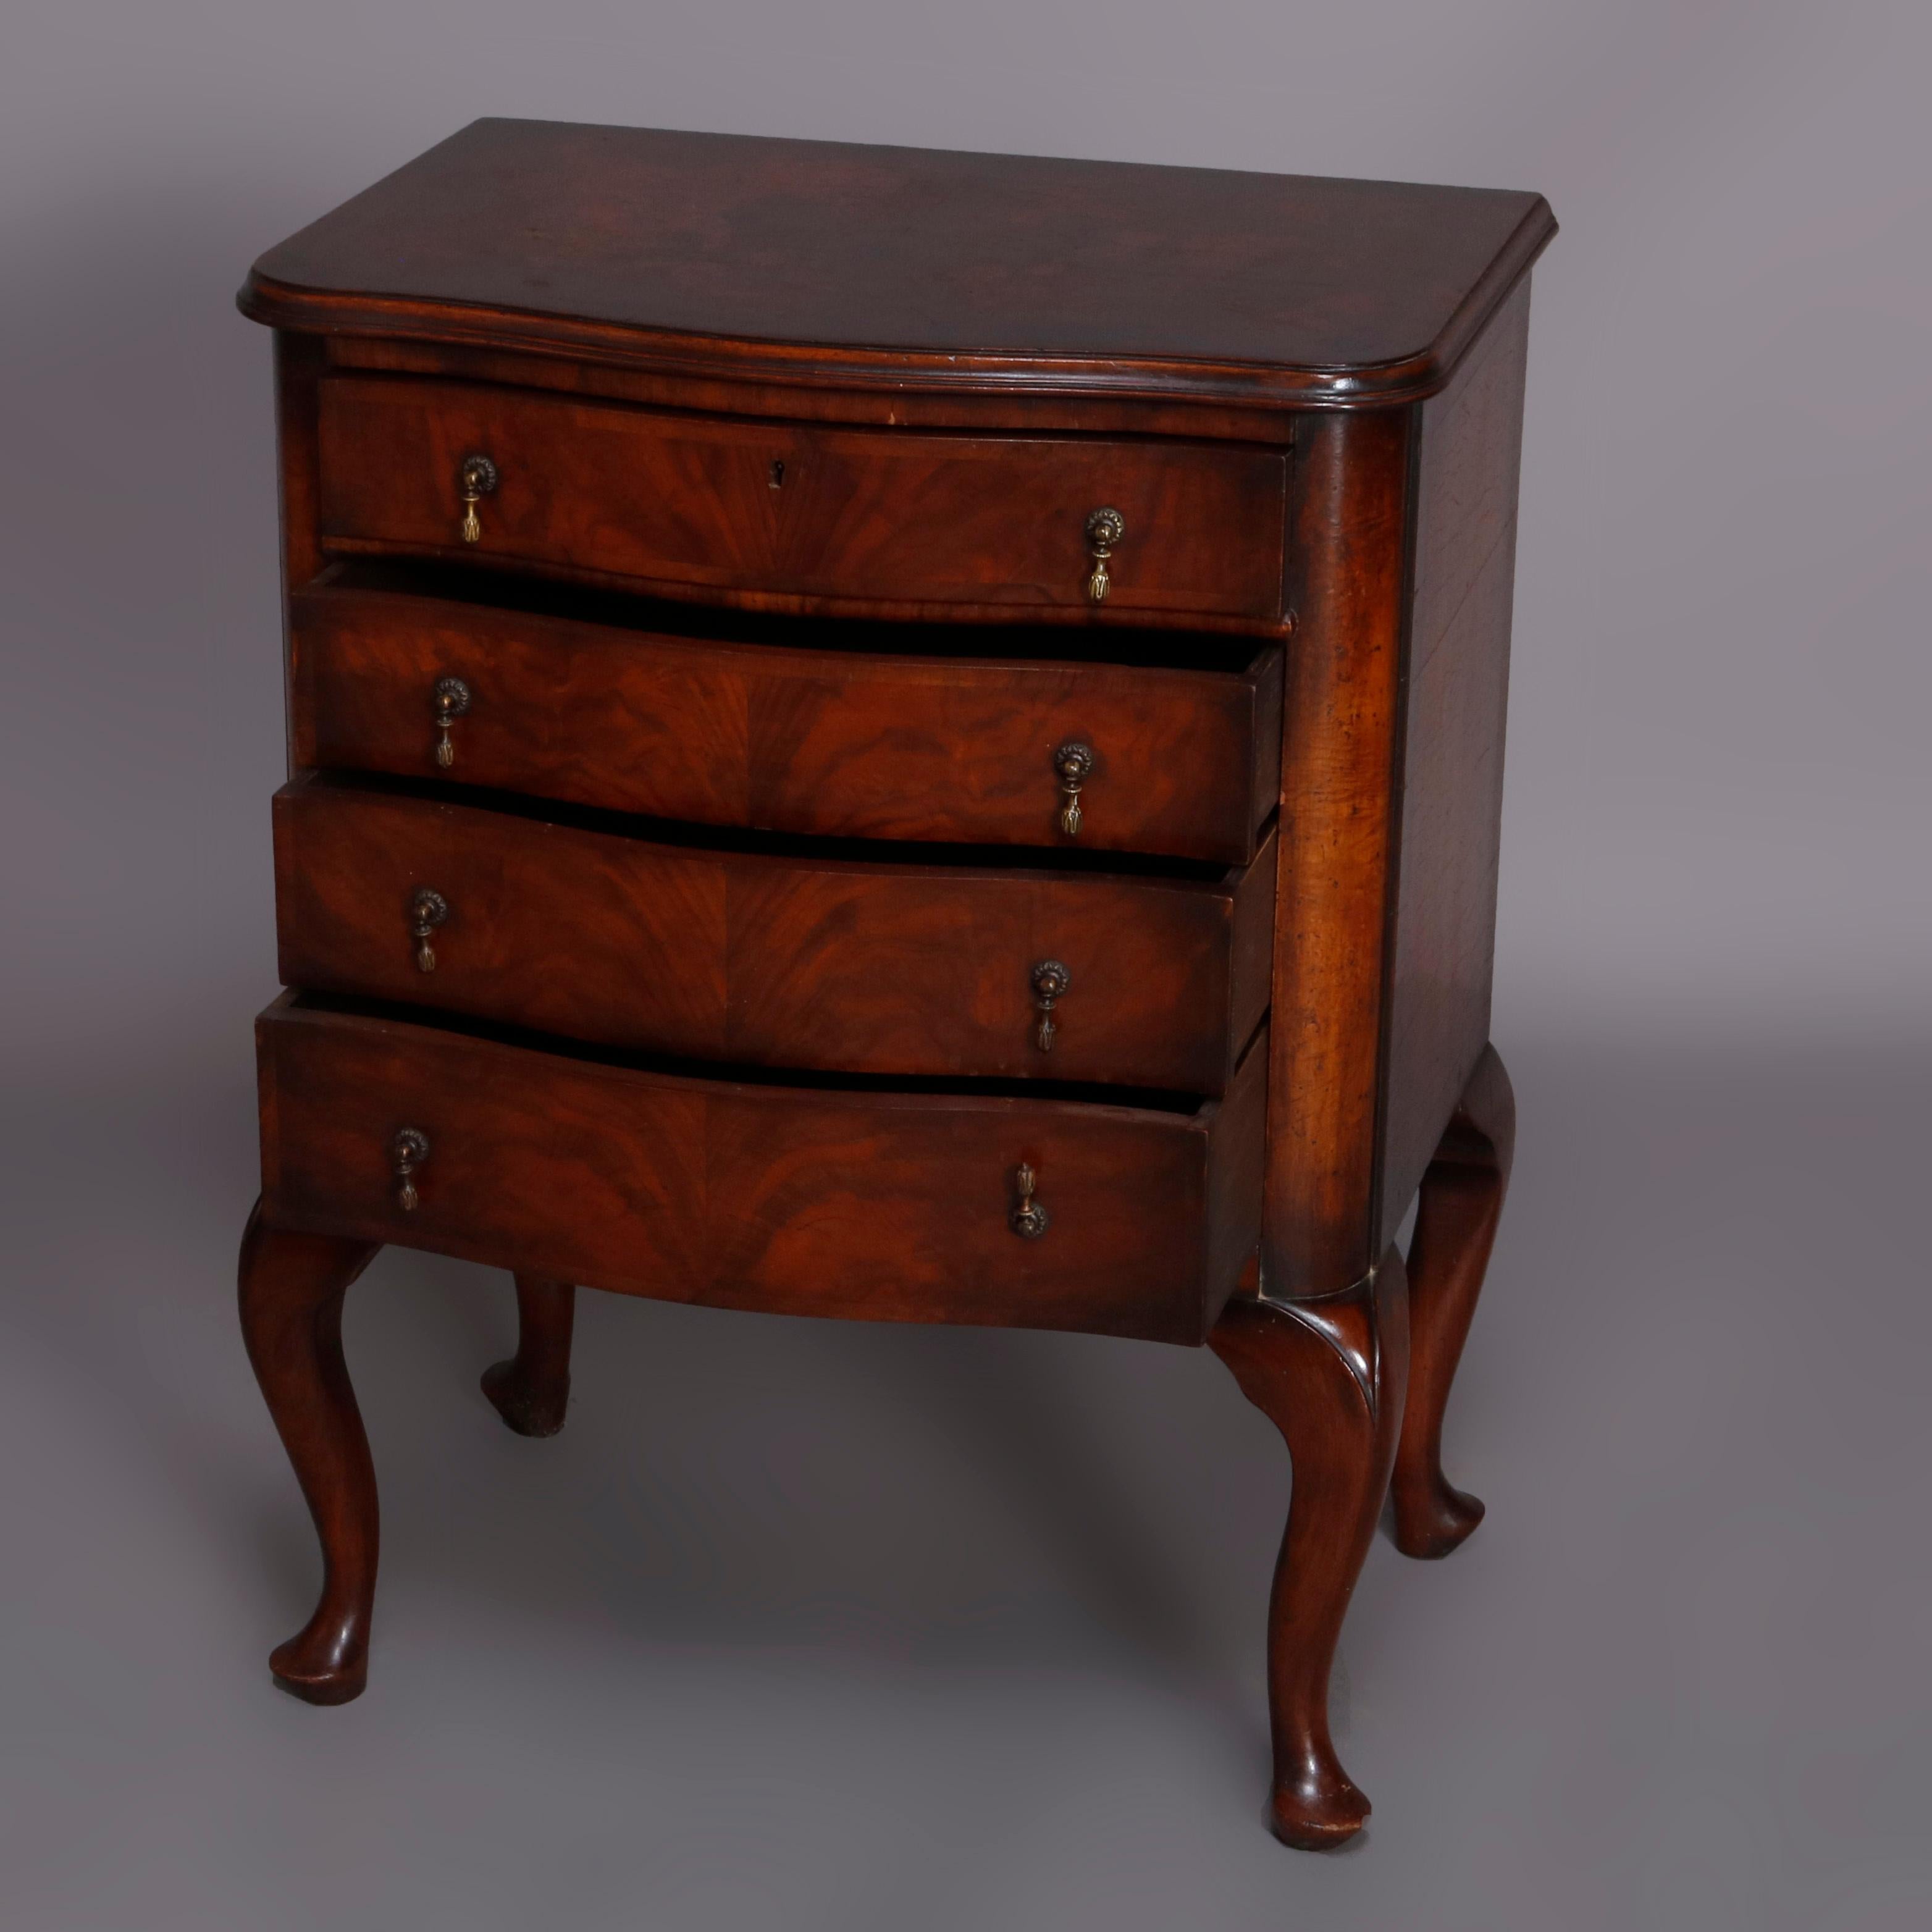 A vintage Queen Anne style mahogany side stand offers serpentine form with case having four bookmatched flame mahogany drawers and shaped skirt, raised on cabriole legs terminating in pad feet, cast bronze drop pulls throughout, 20th